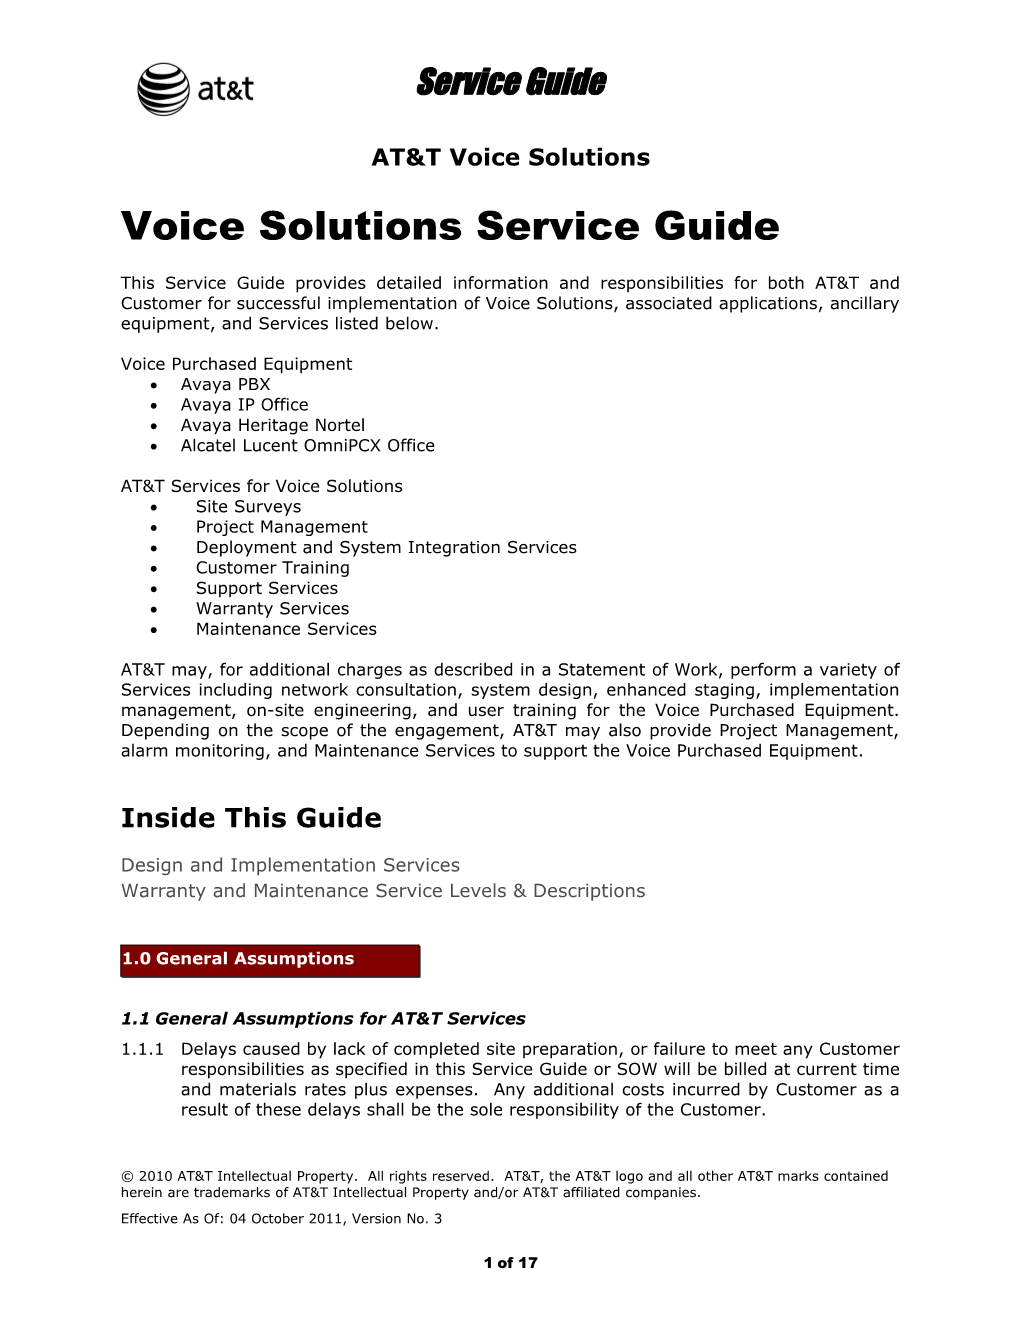 AT&T Service Guide For Voice CPE & Services